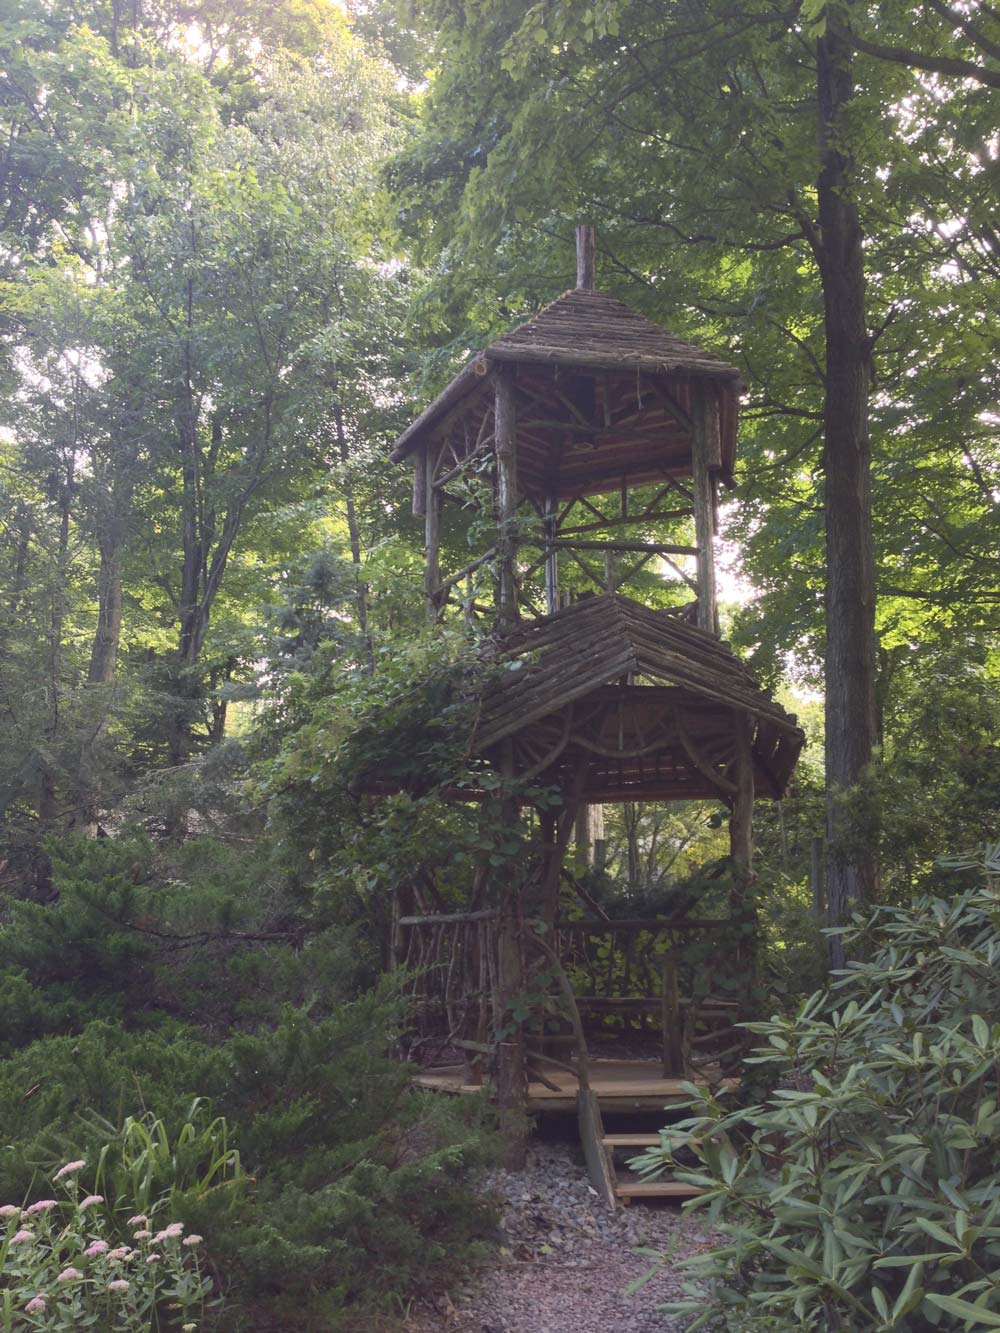 Outdoor two story gazebo built in the rustic style using logs and branches titled the Down to Earth Tree Tower